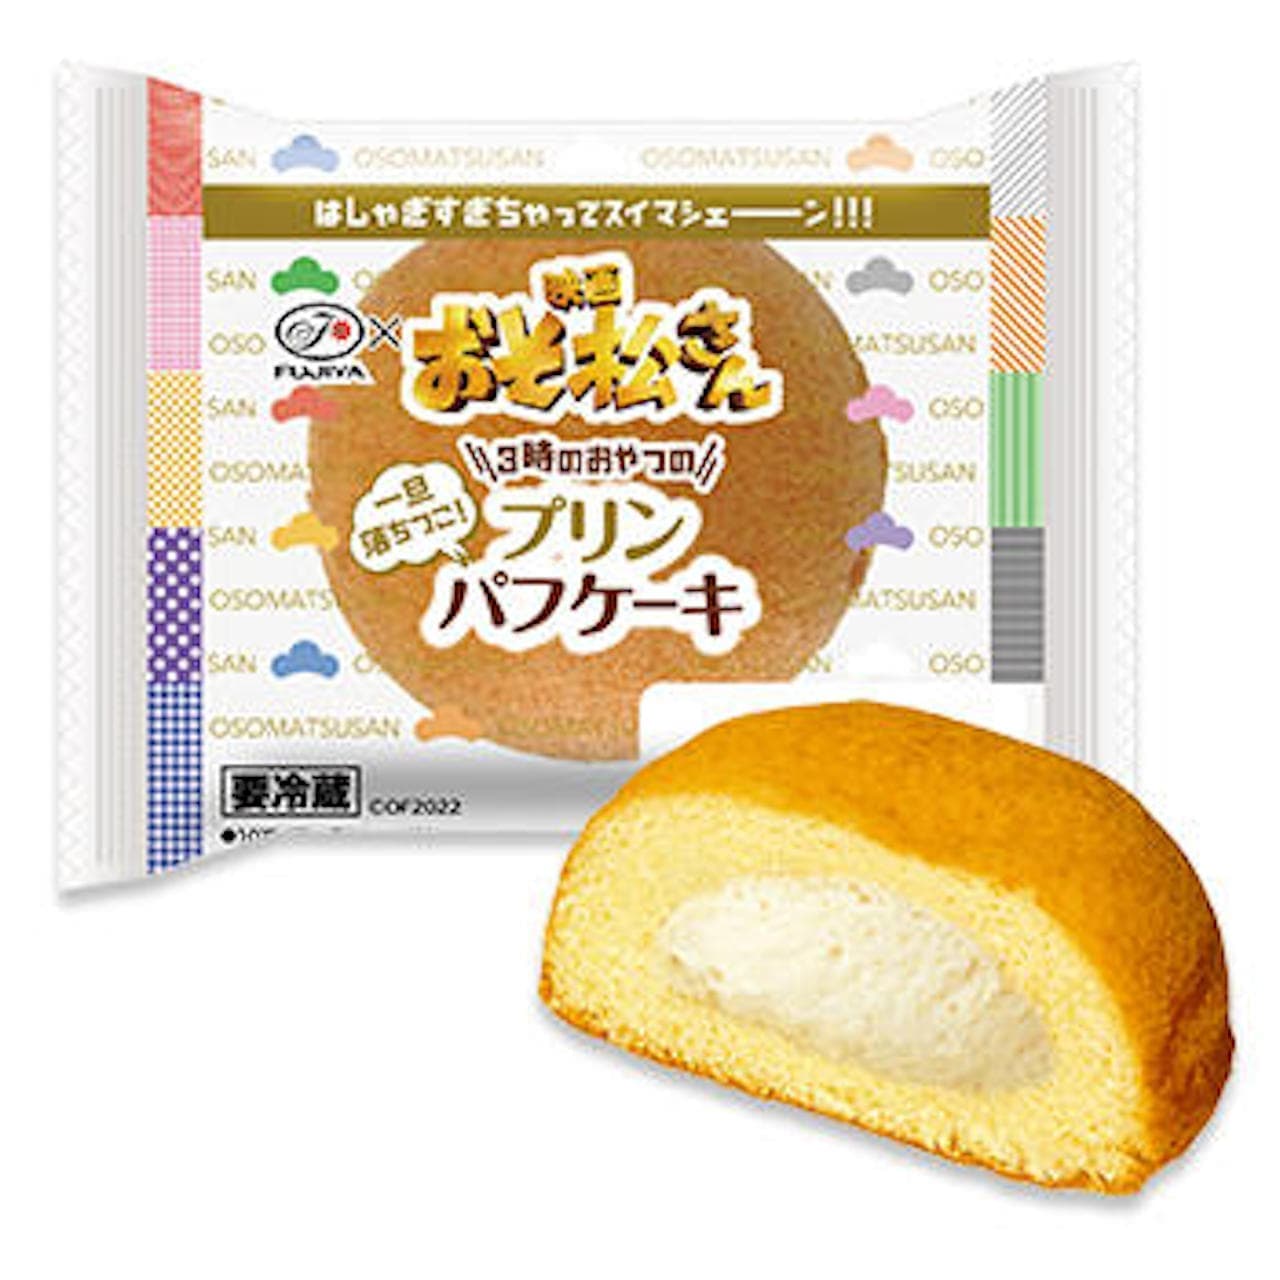 Fujiya "Osomatsu-san the Movie" Collaboration ＼"I'm too excited, Swimashane! We're going to have a pudding puff cake for a 3 o'clock snack.